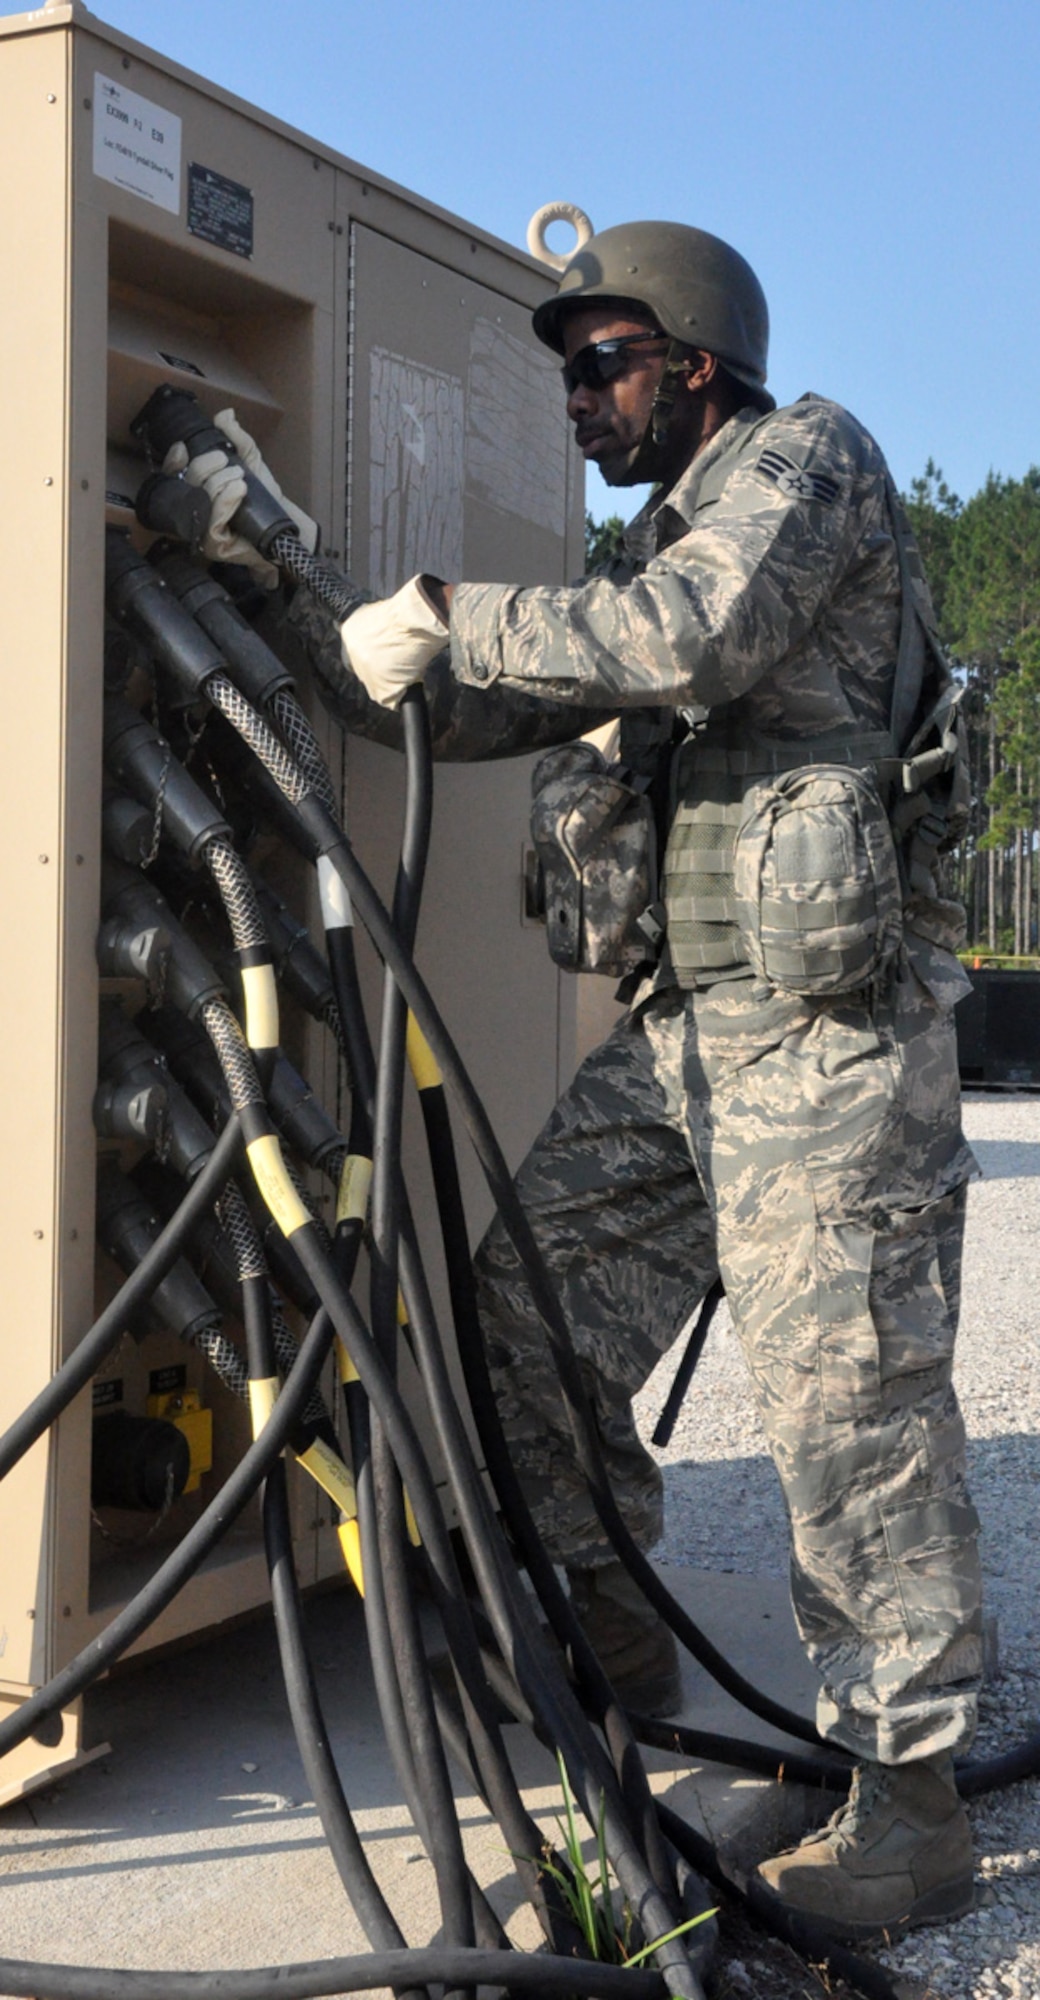 U.S. Air Force Senior Airman Ernest Munns from the 446th Civil Engineer Squadron connects a large cannon plug on a secondary distribution center used to supply electrical power to entire bare base tent cities during a field exercise at Tyndall Air Force Base, Fla. on May 24, 2011. Airman Munns is one of 30 Reservists from the 446th CES participating in Silver Flag 2011, a week-long training exercise designed to improve the readiness capability of Air Force civil engineers. Airman Munns is a father of three children, and works as a cable installer with Comcast in his civilian life. (U.S. Air Force photo by Staff Sgt. Grant Saylor/Released)